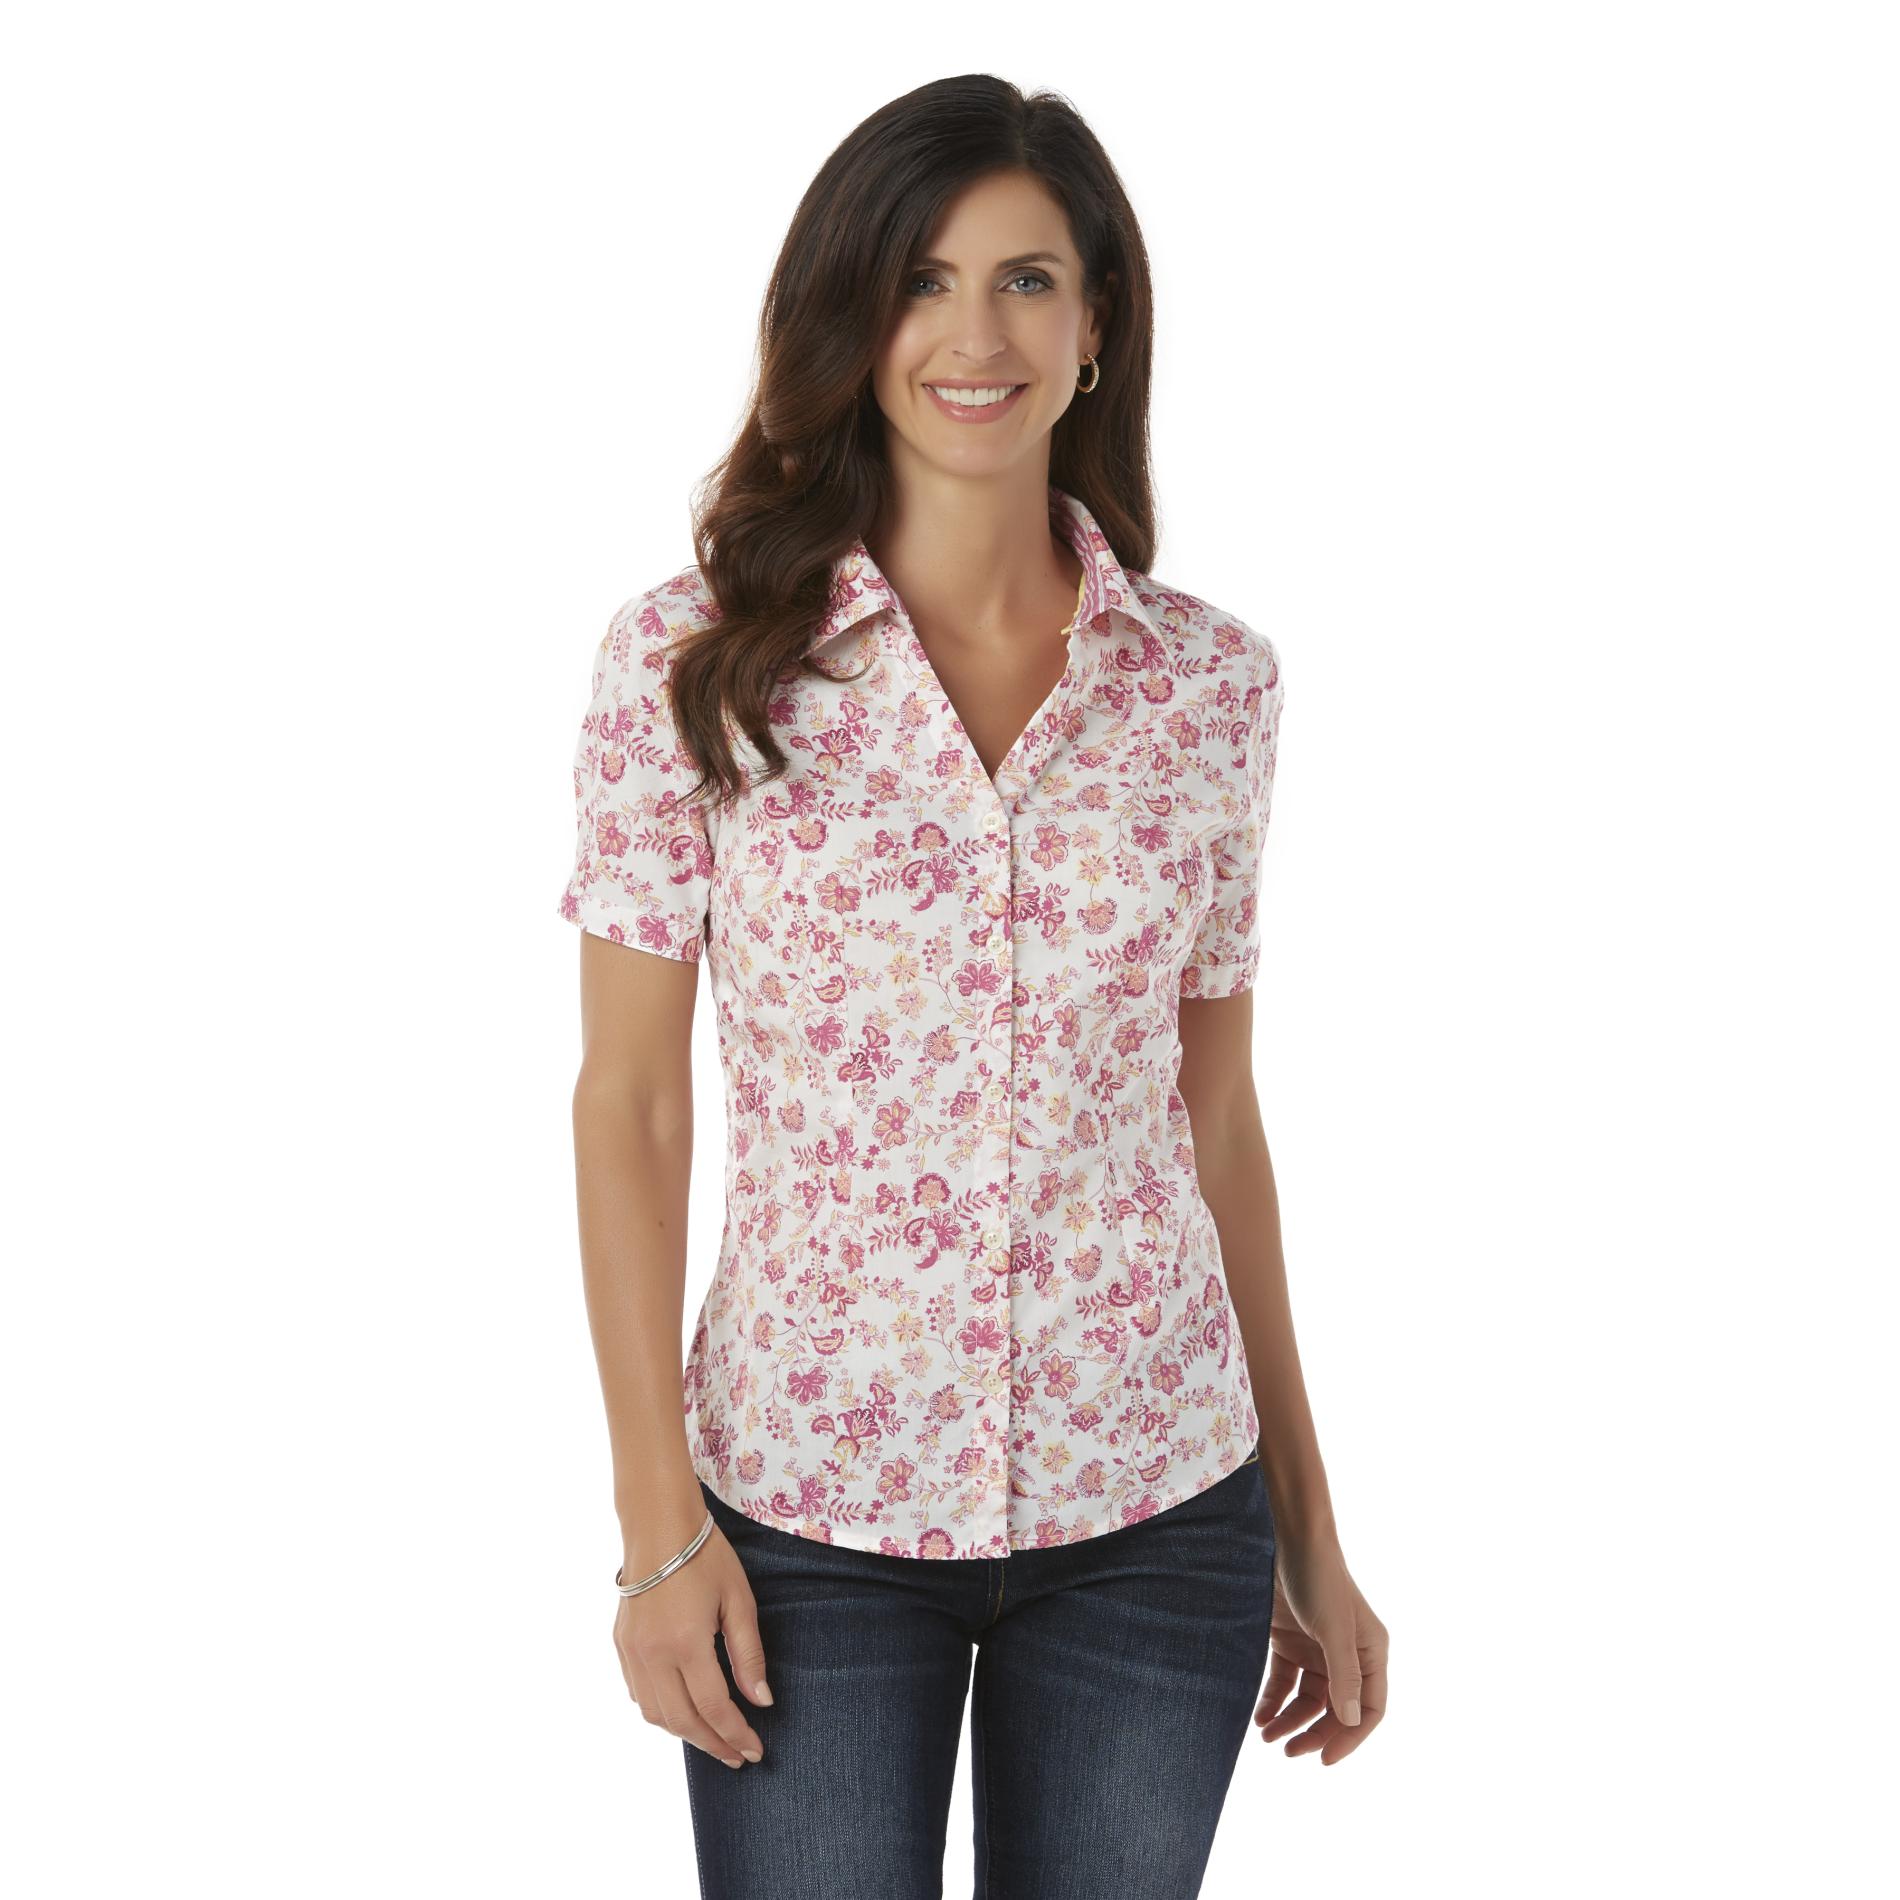 Basic Editions Women's Camp Shirt - Floral